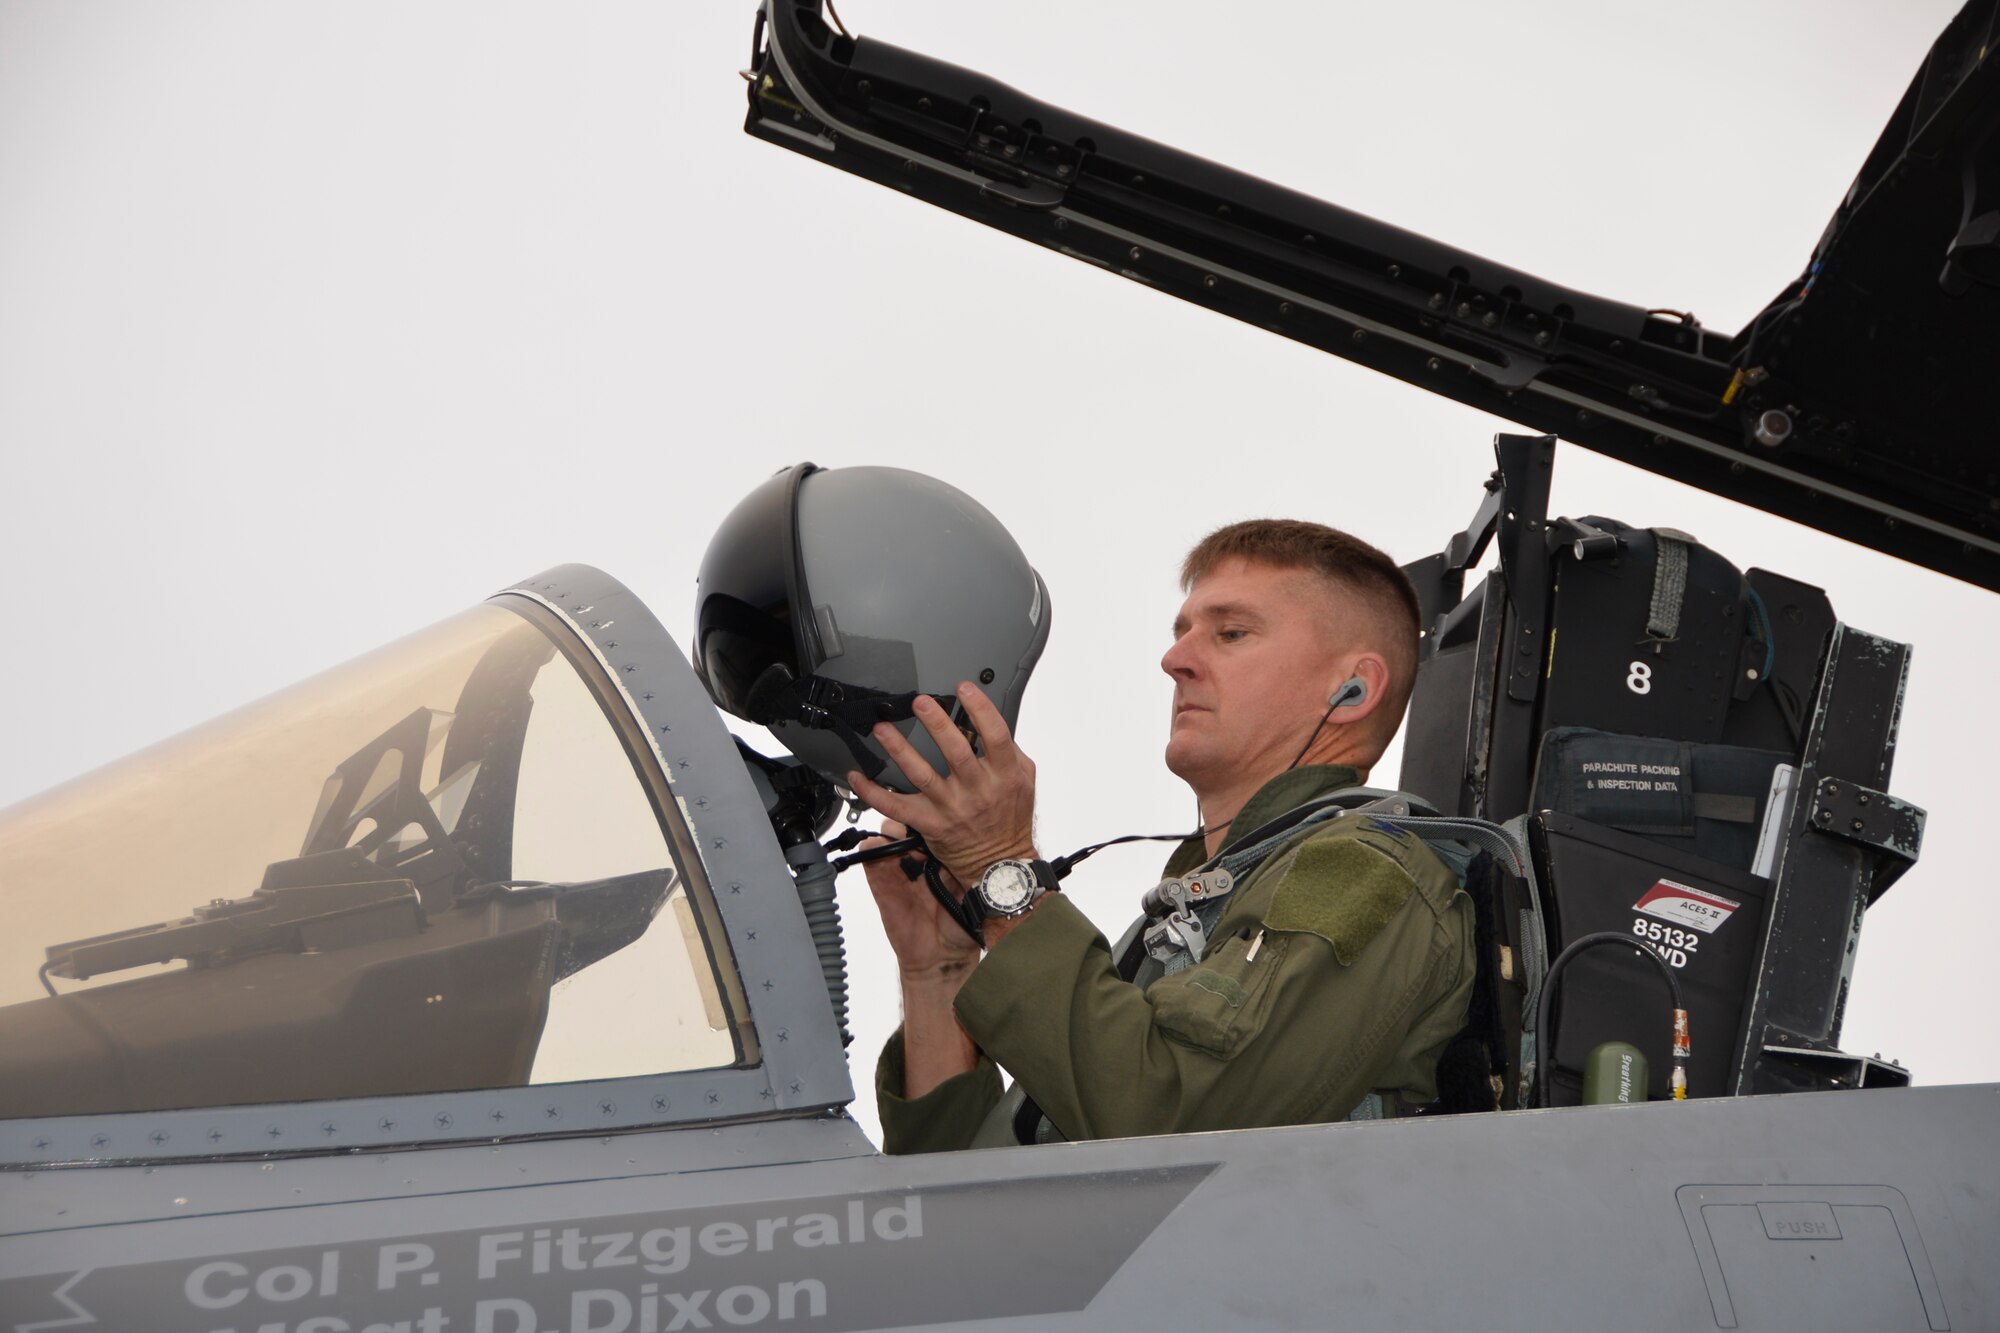 Col. Derek Routt, 1st Air Force (Air Forces Northern) Deputy Chief of Staff, checks his helmet prior to a flight during Combat Archer at Tyndall Air Force Base Jan. 28. Combat Archer is a two-week weapon systems evaluation program where participants load, fly and shoot live missiles and subsequently evaluate the entire process to validate whether the weapon performs according to established specifications. (Air Force Photo Released/Mary McHale)

